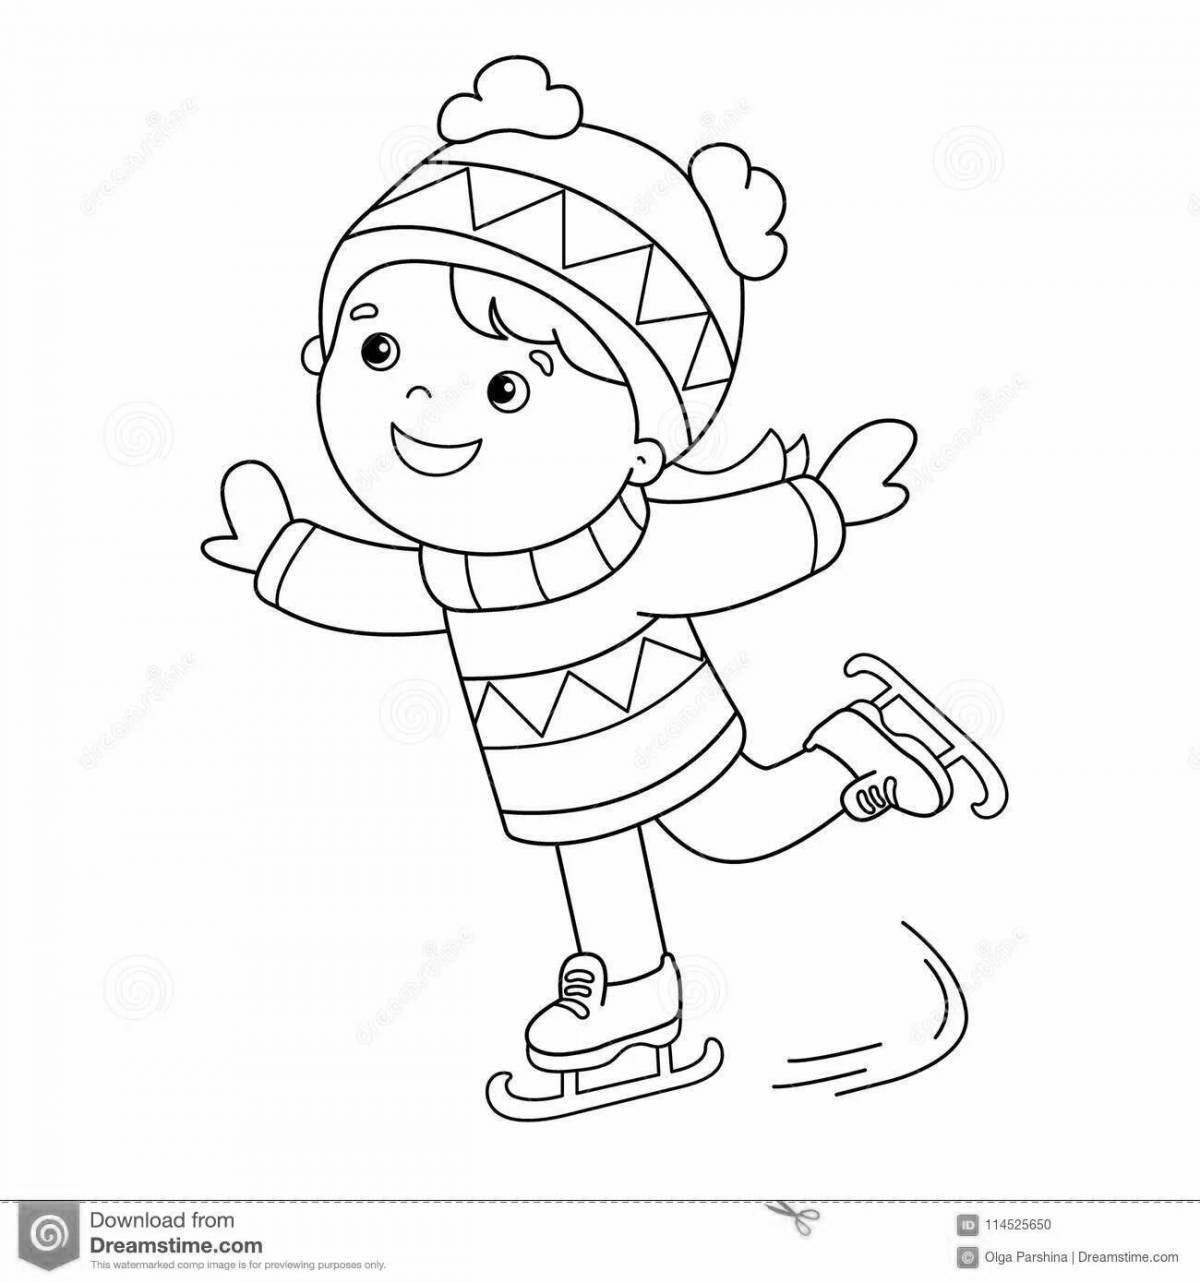 Adorable coloring book for kids ice skating